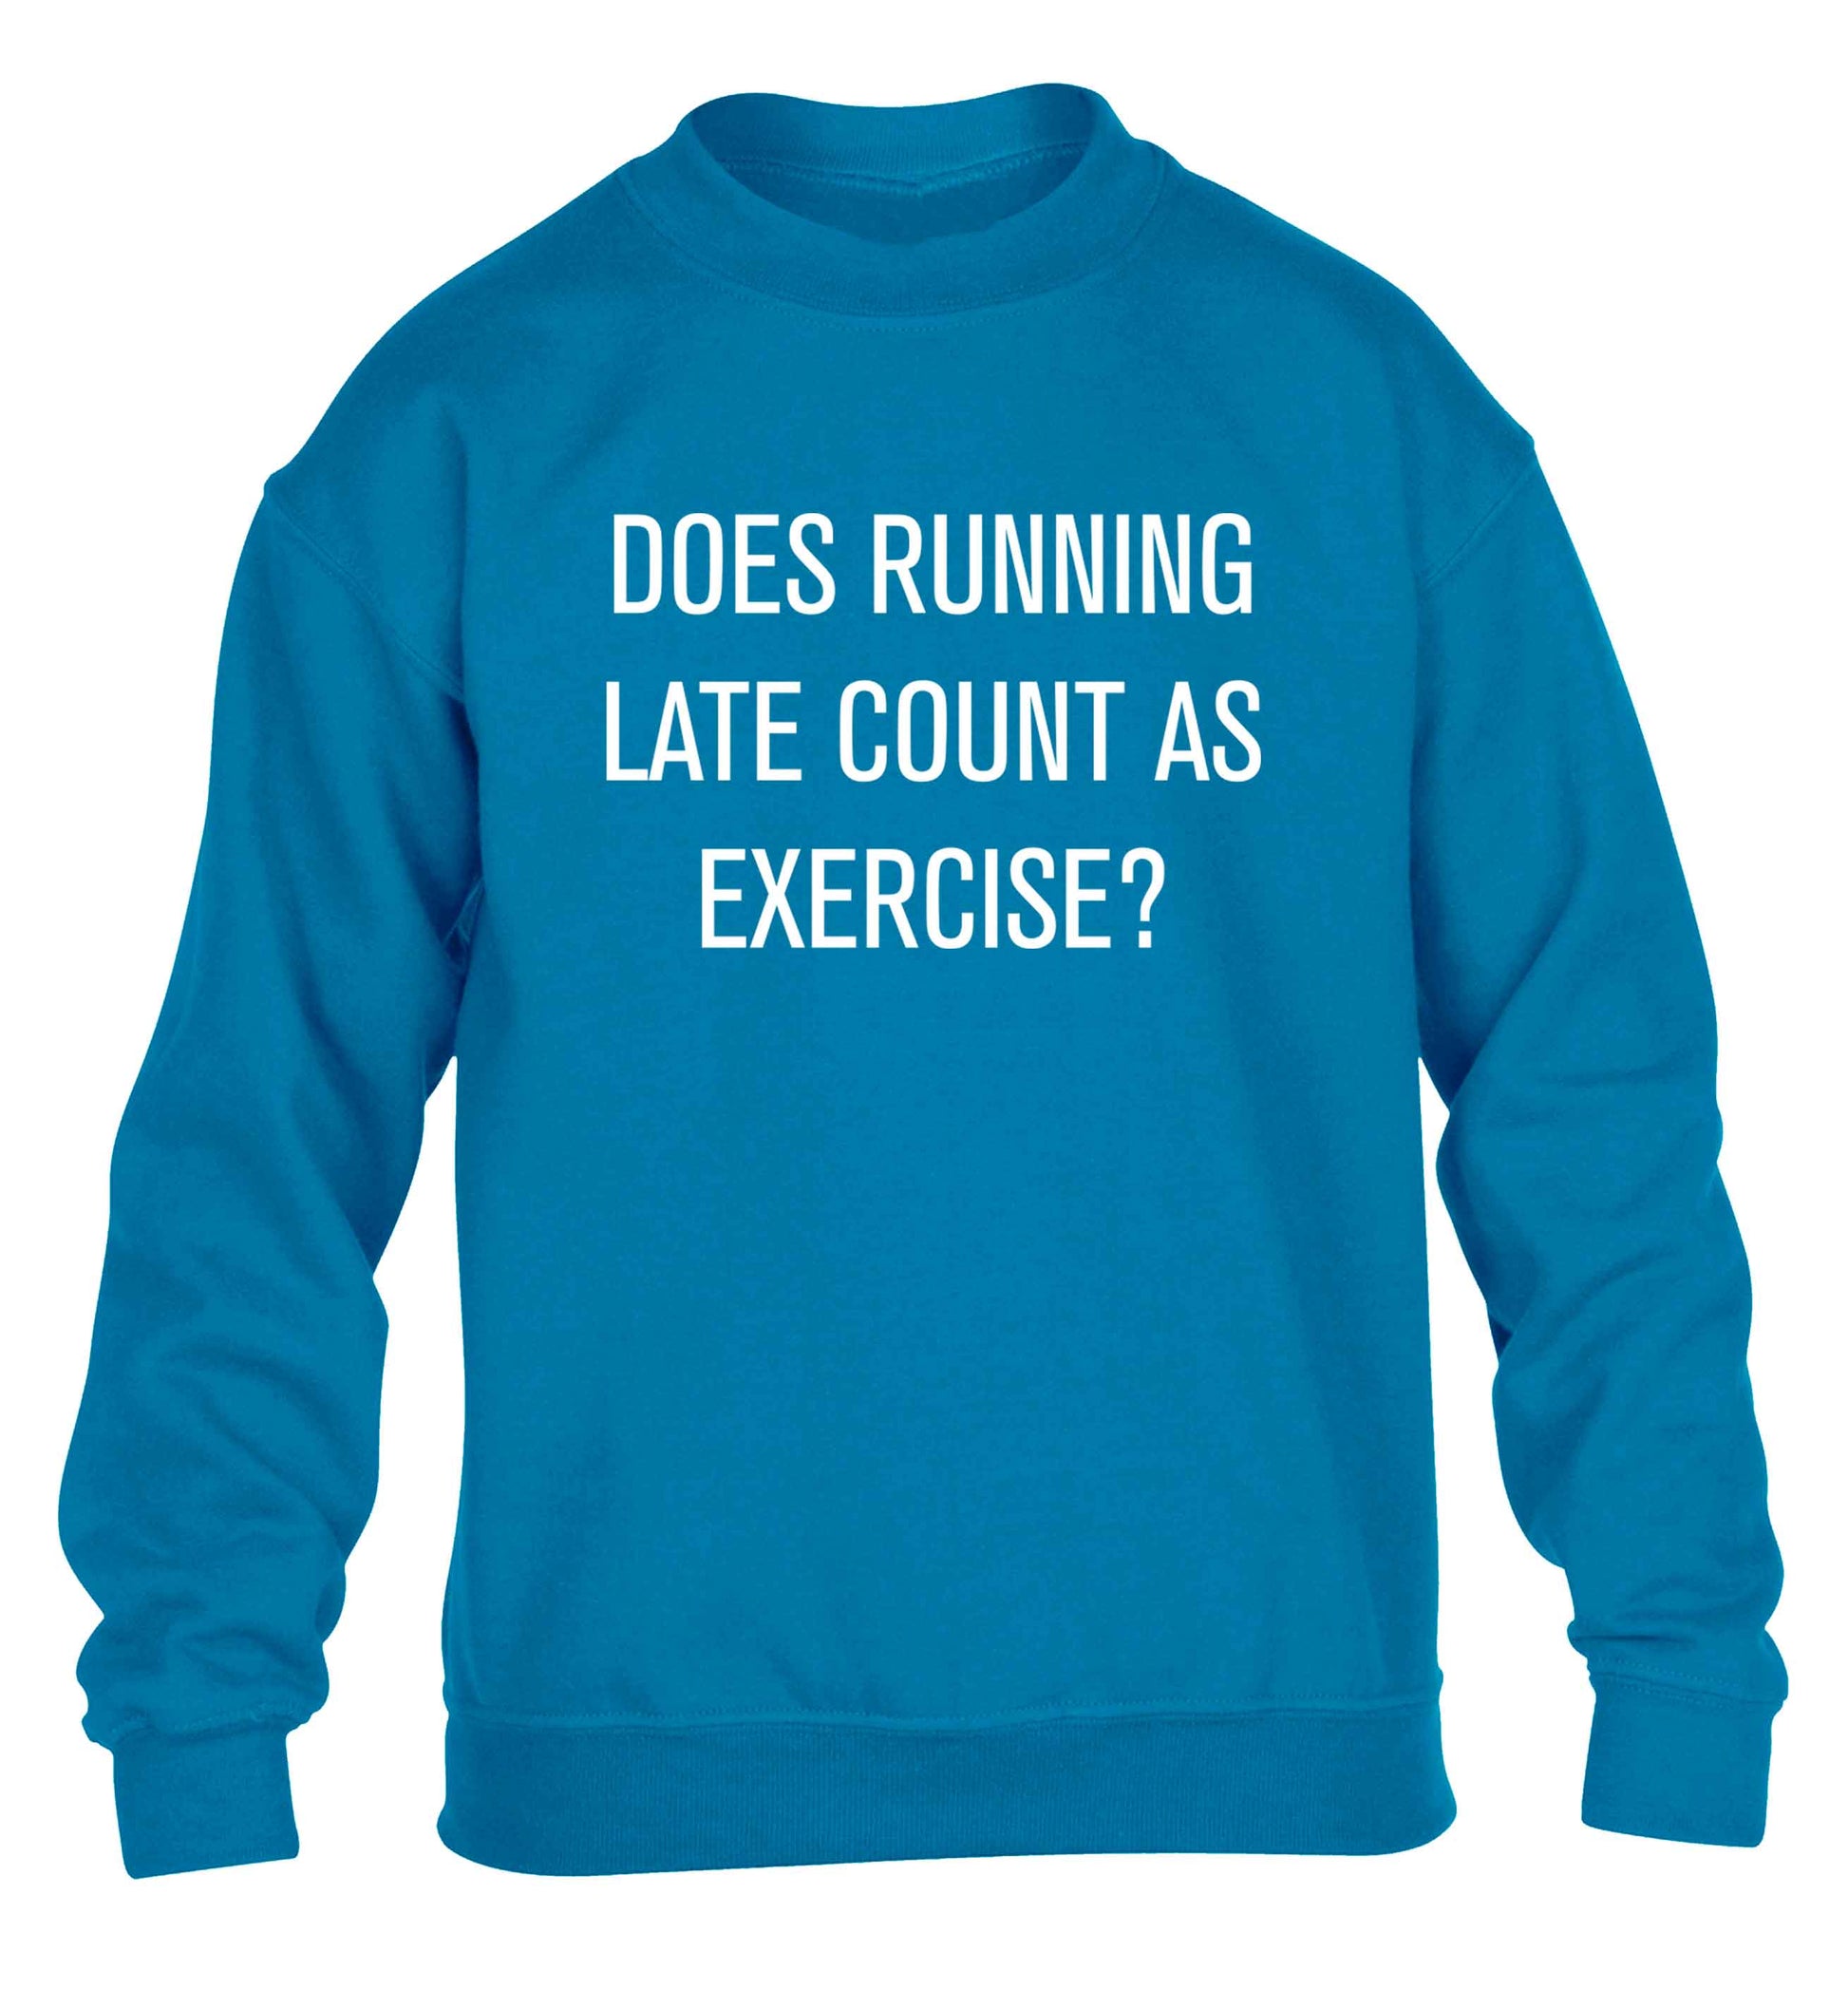 Does running late count as exercise? children's blue sweater 12-13 Years